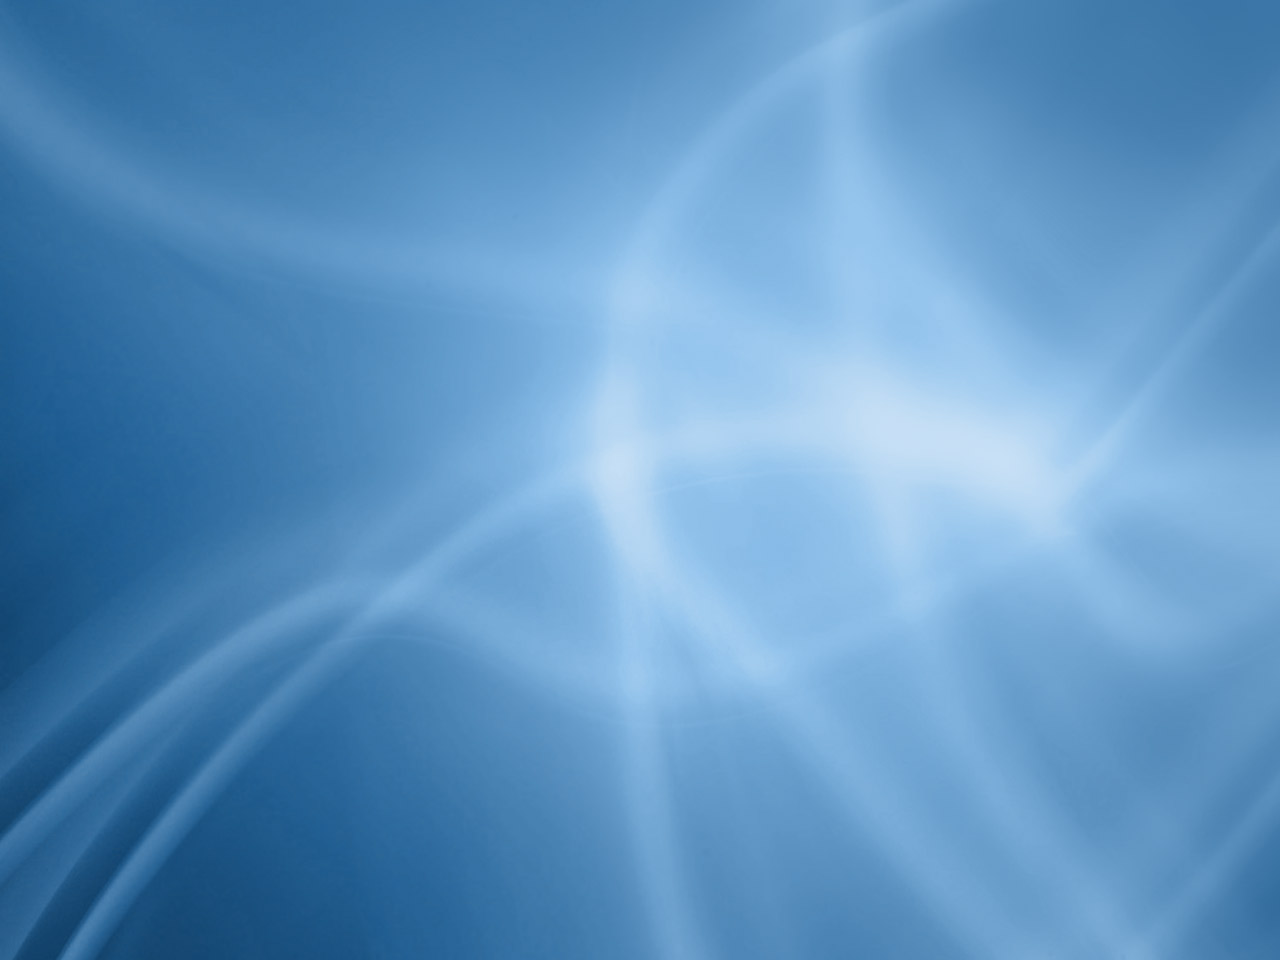 abstract_background_blue.jpg - 55.79 kB